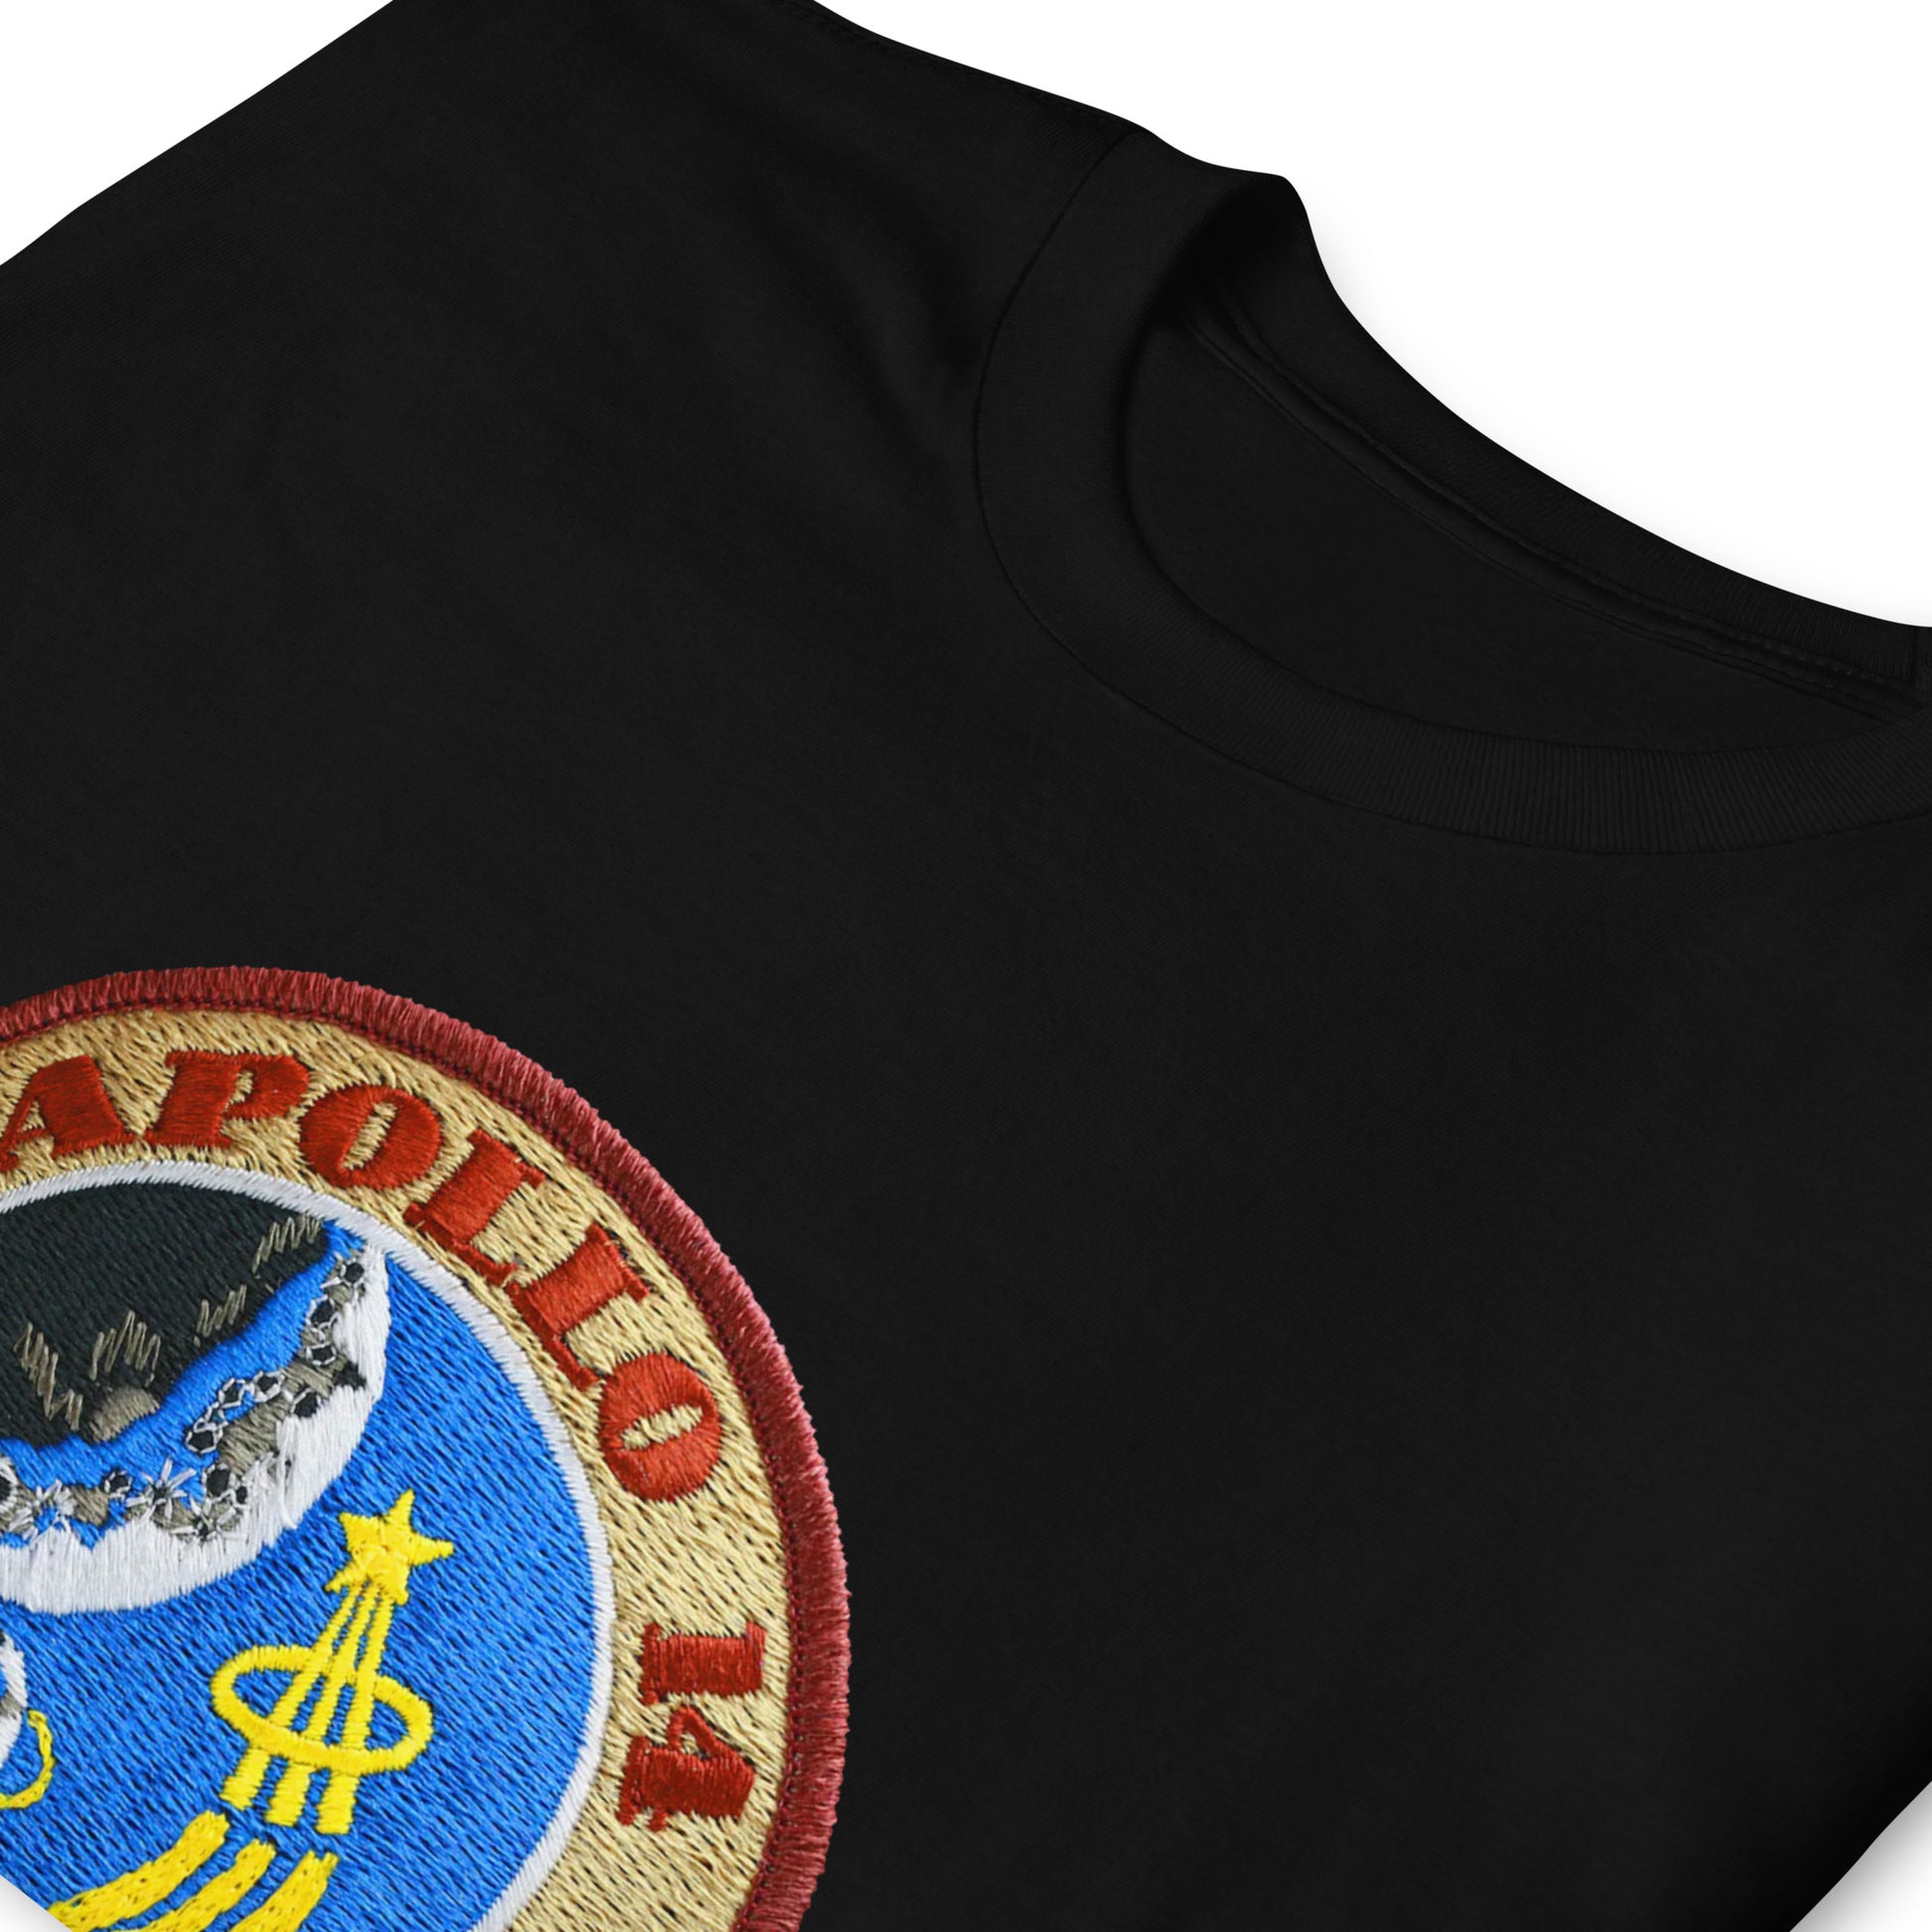 Apollo 14 Mission Patch T-Shirt Exploration – TShirts Astro Space Tee 